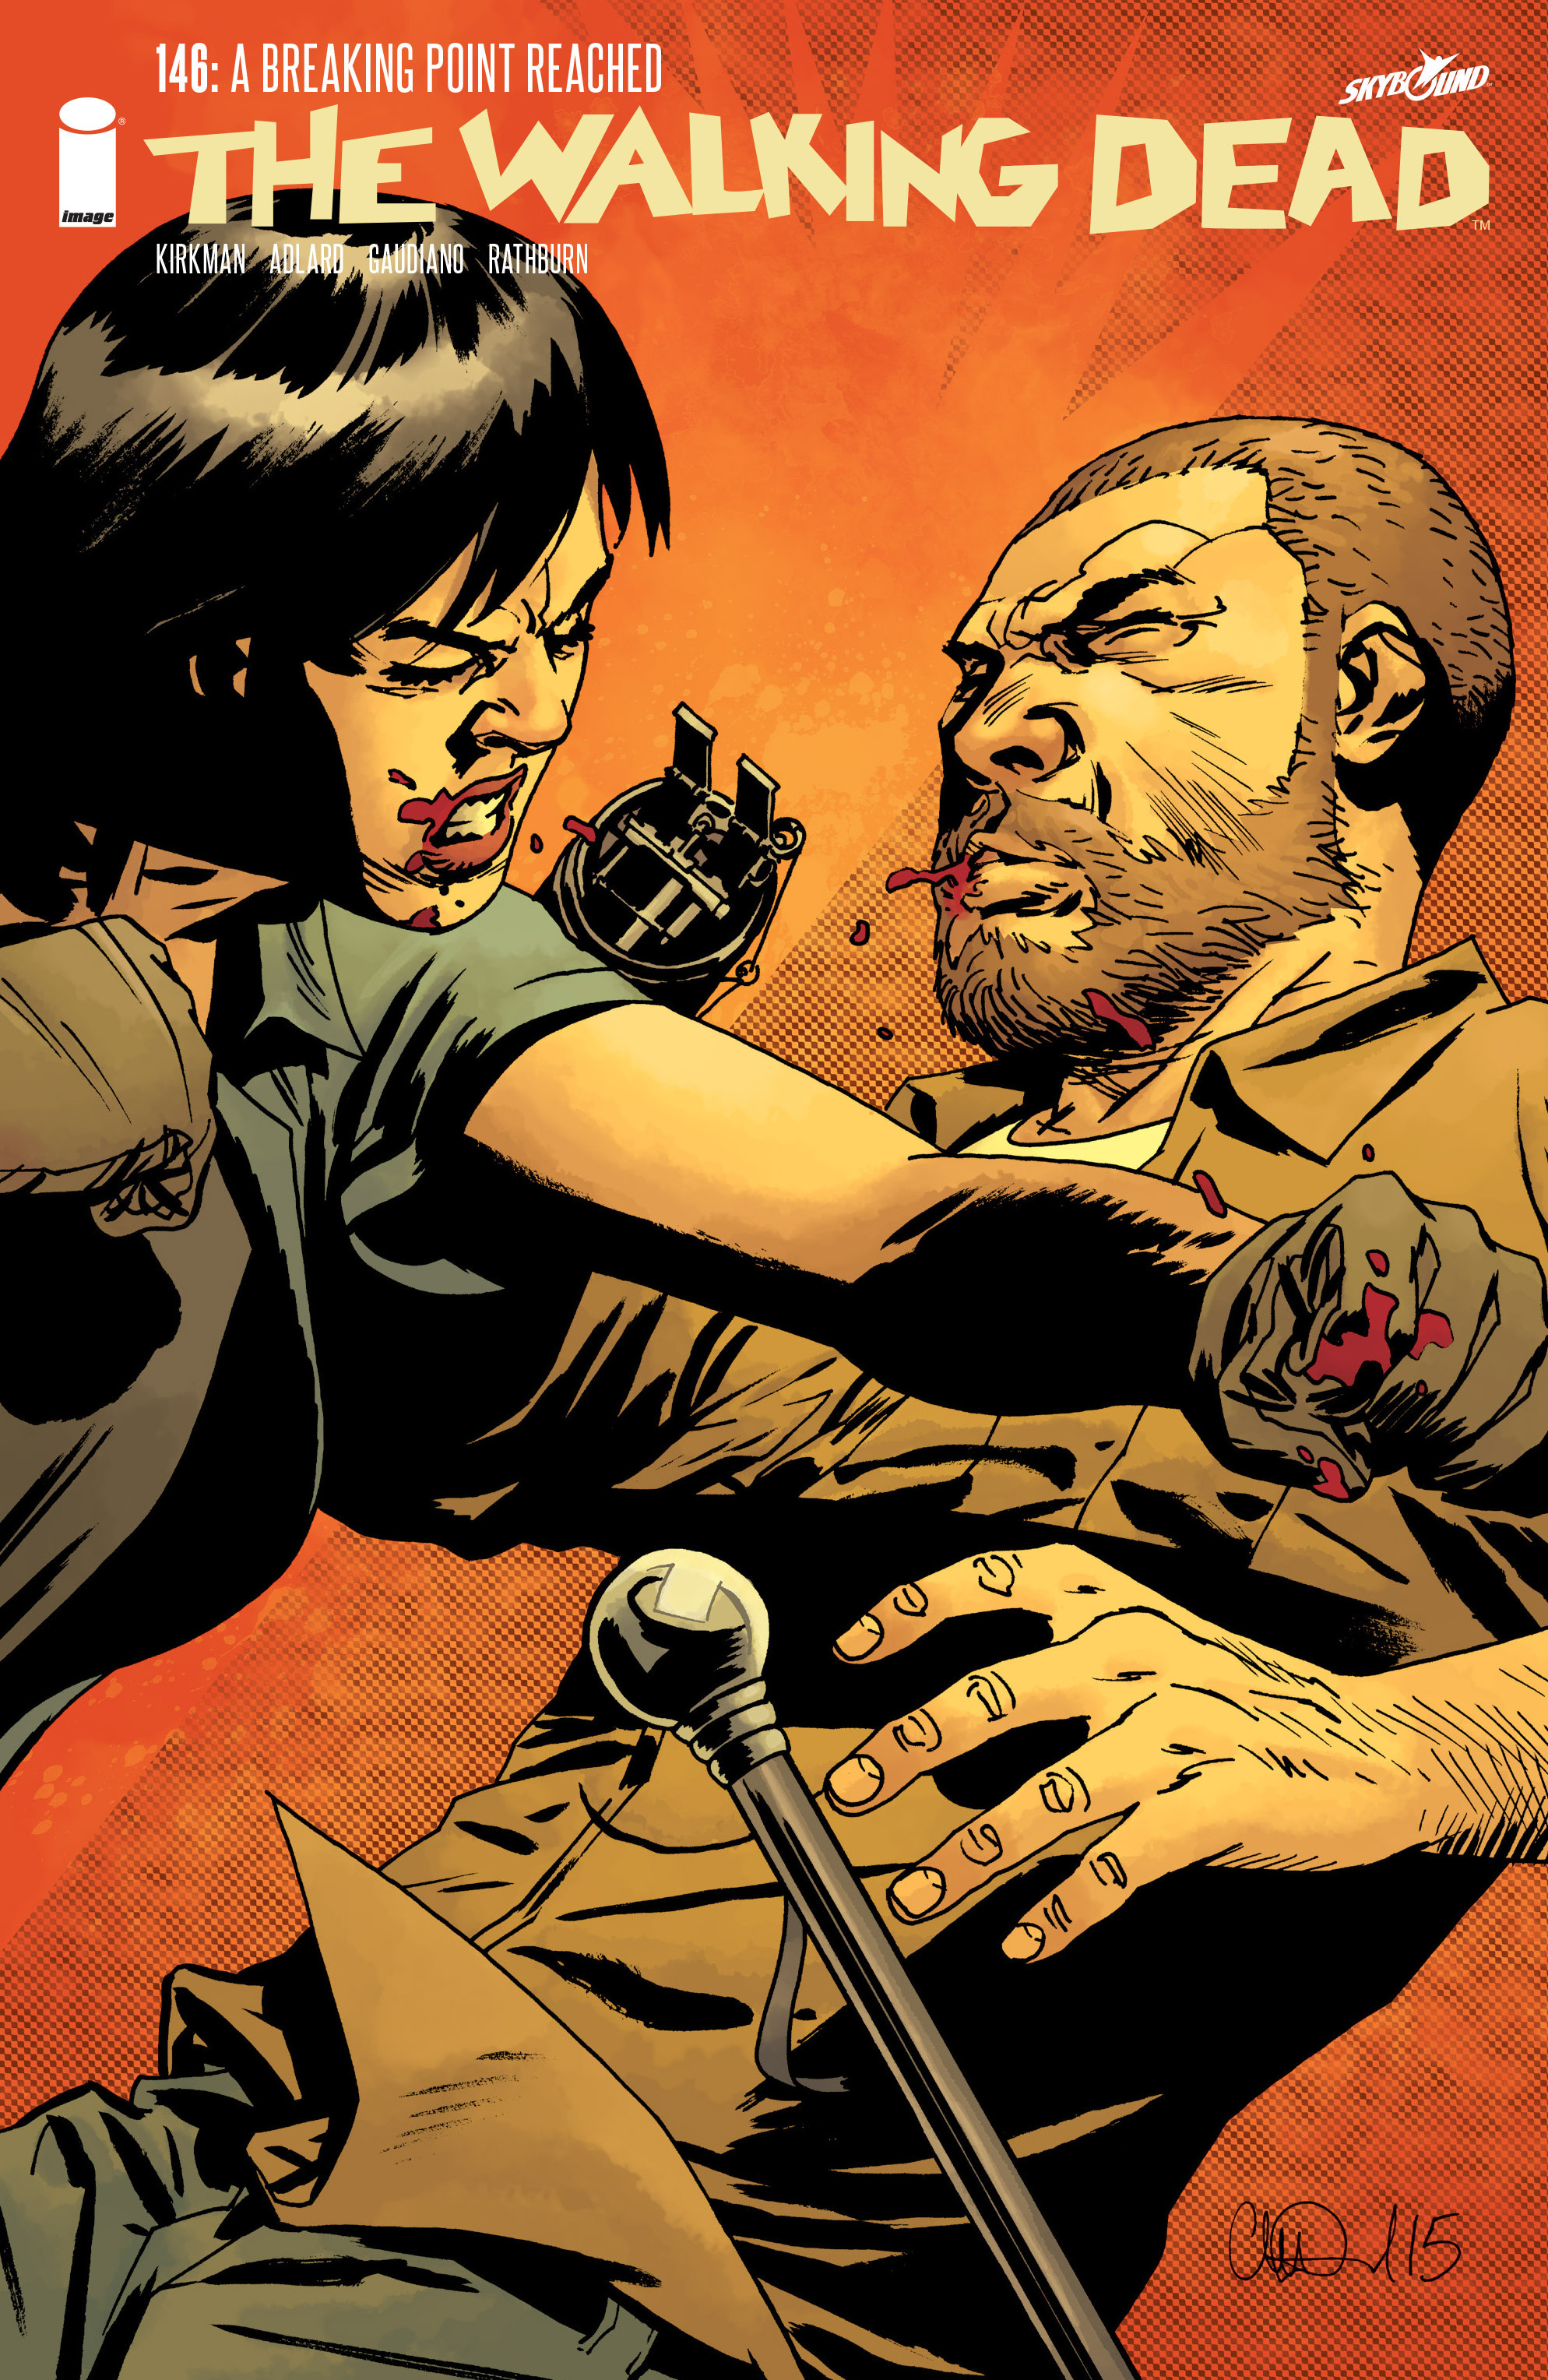 The Walking Dead 146 Page 1